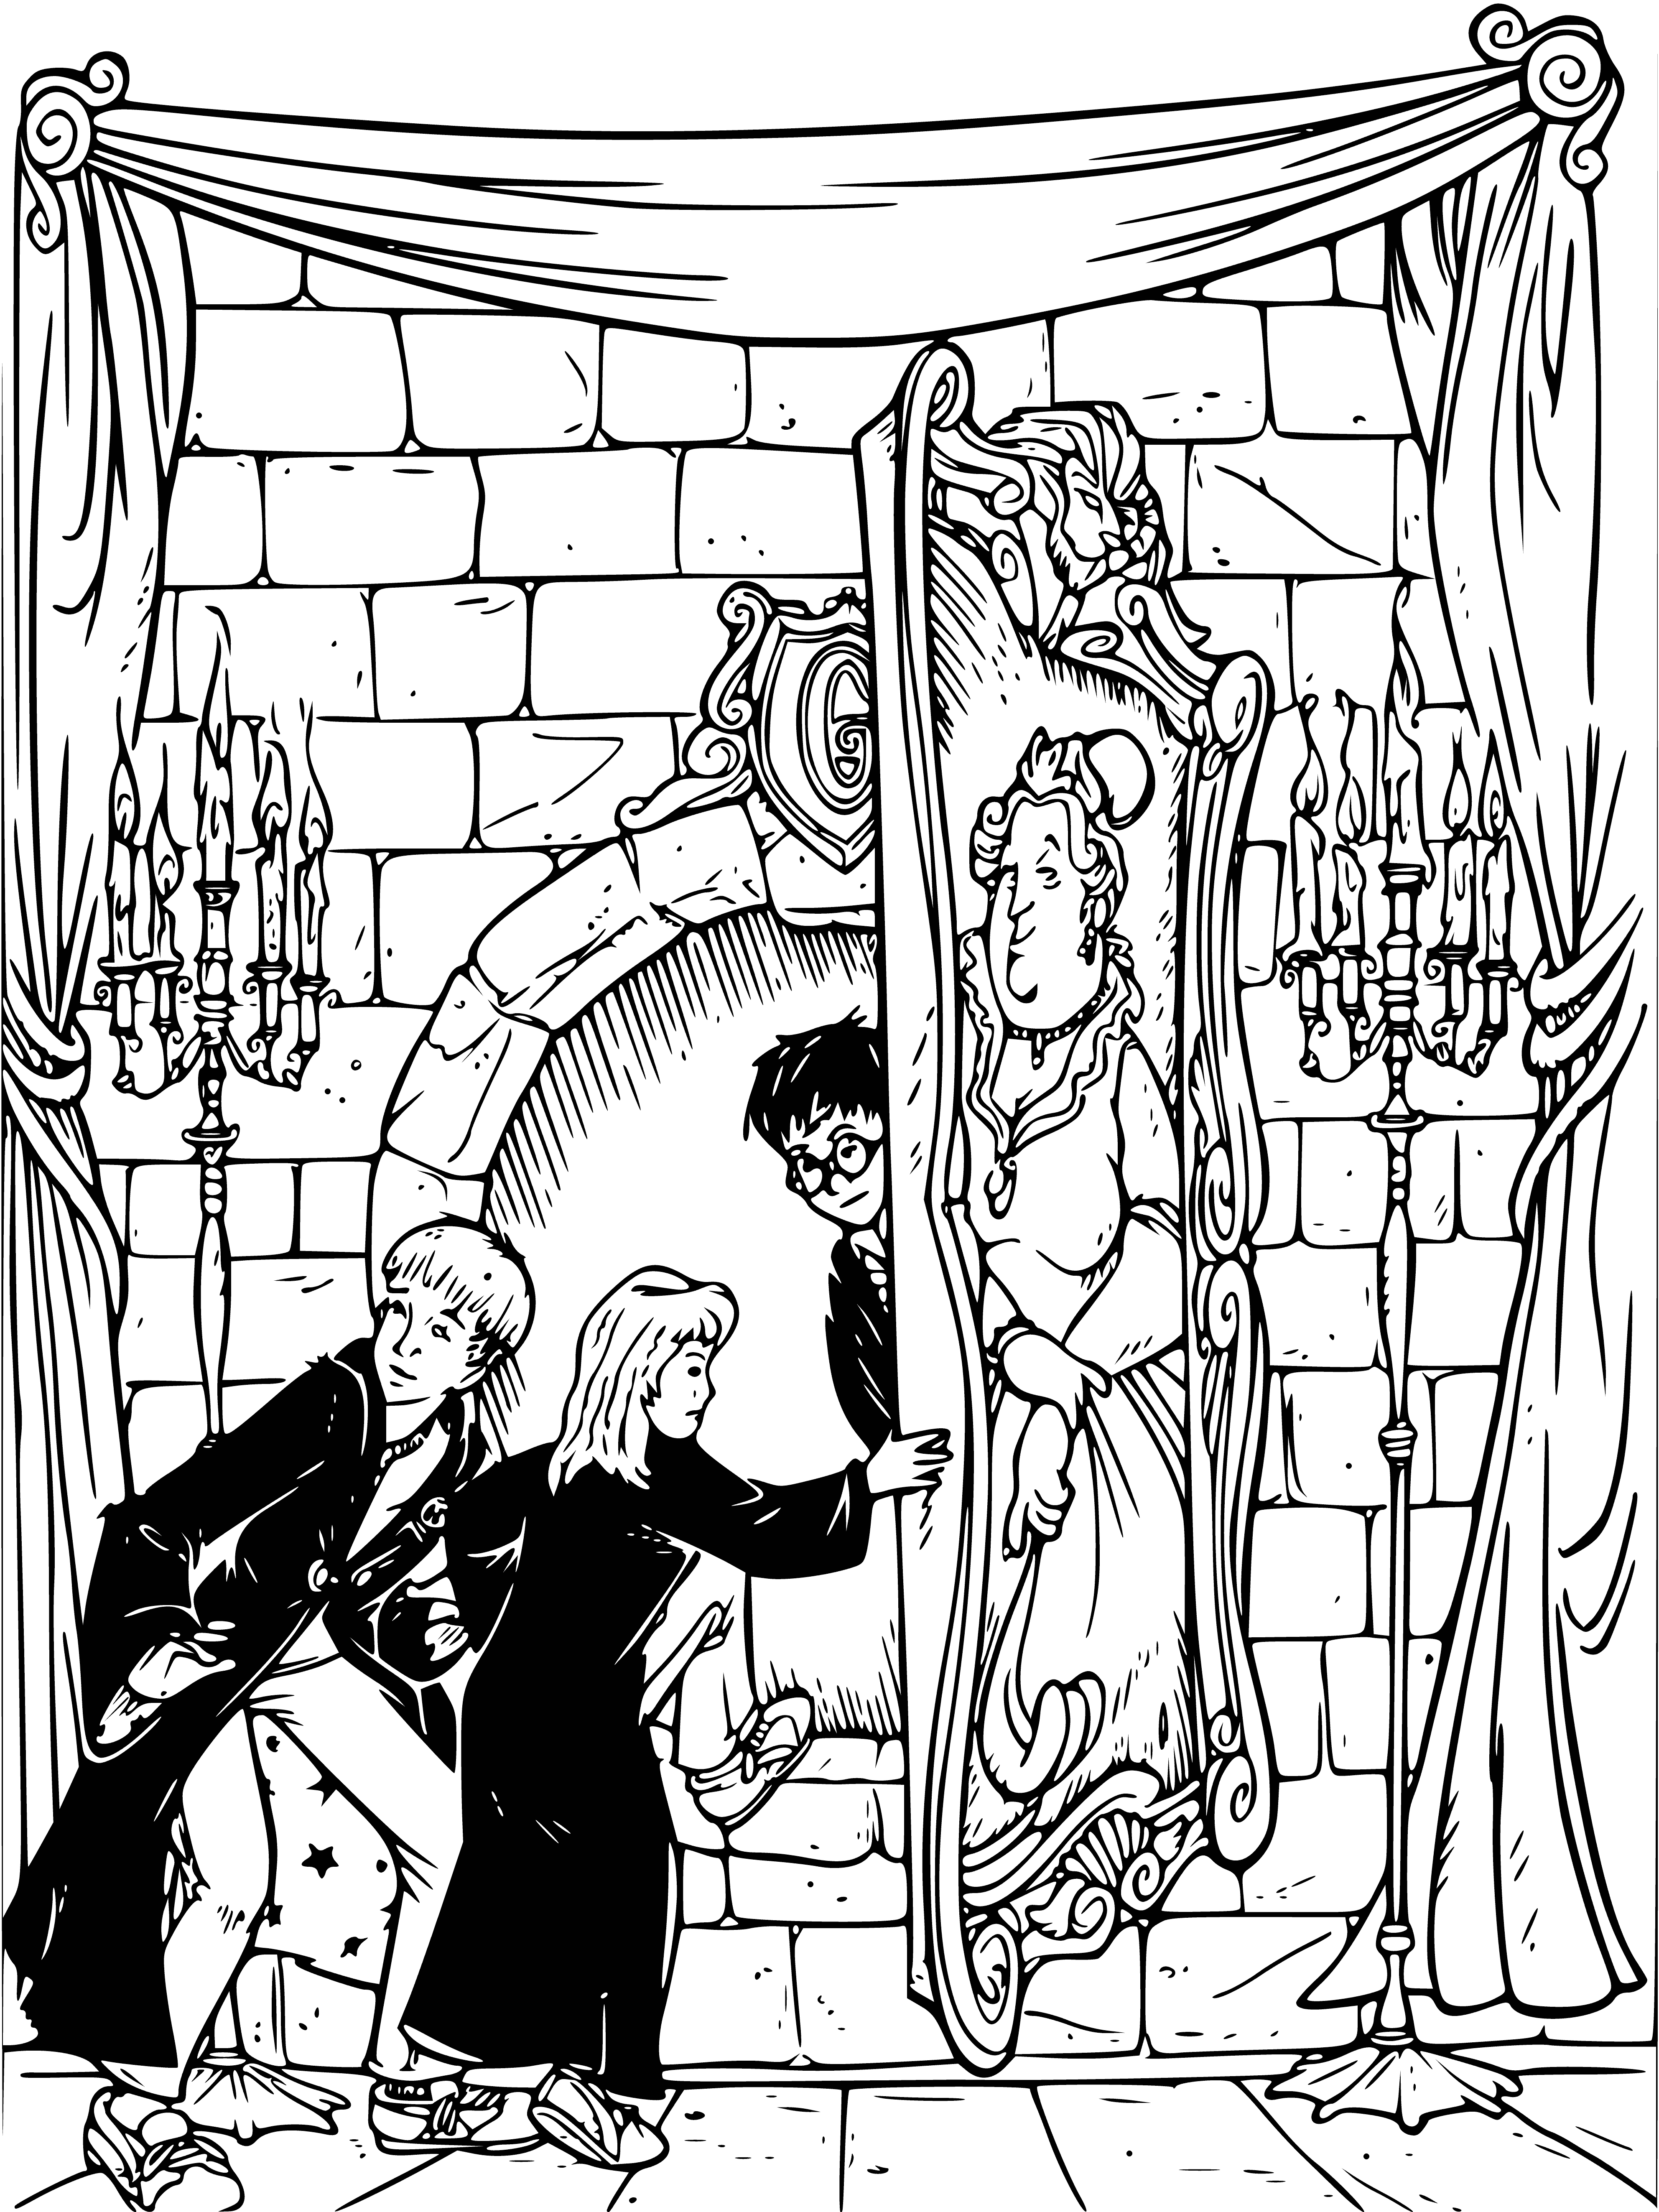 Aisle behind the painting coloring page